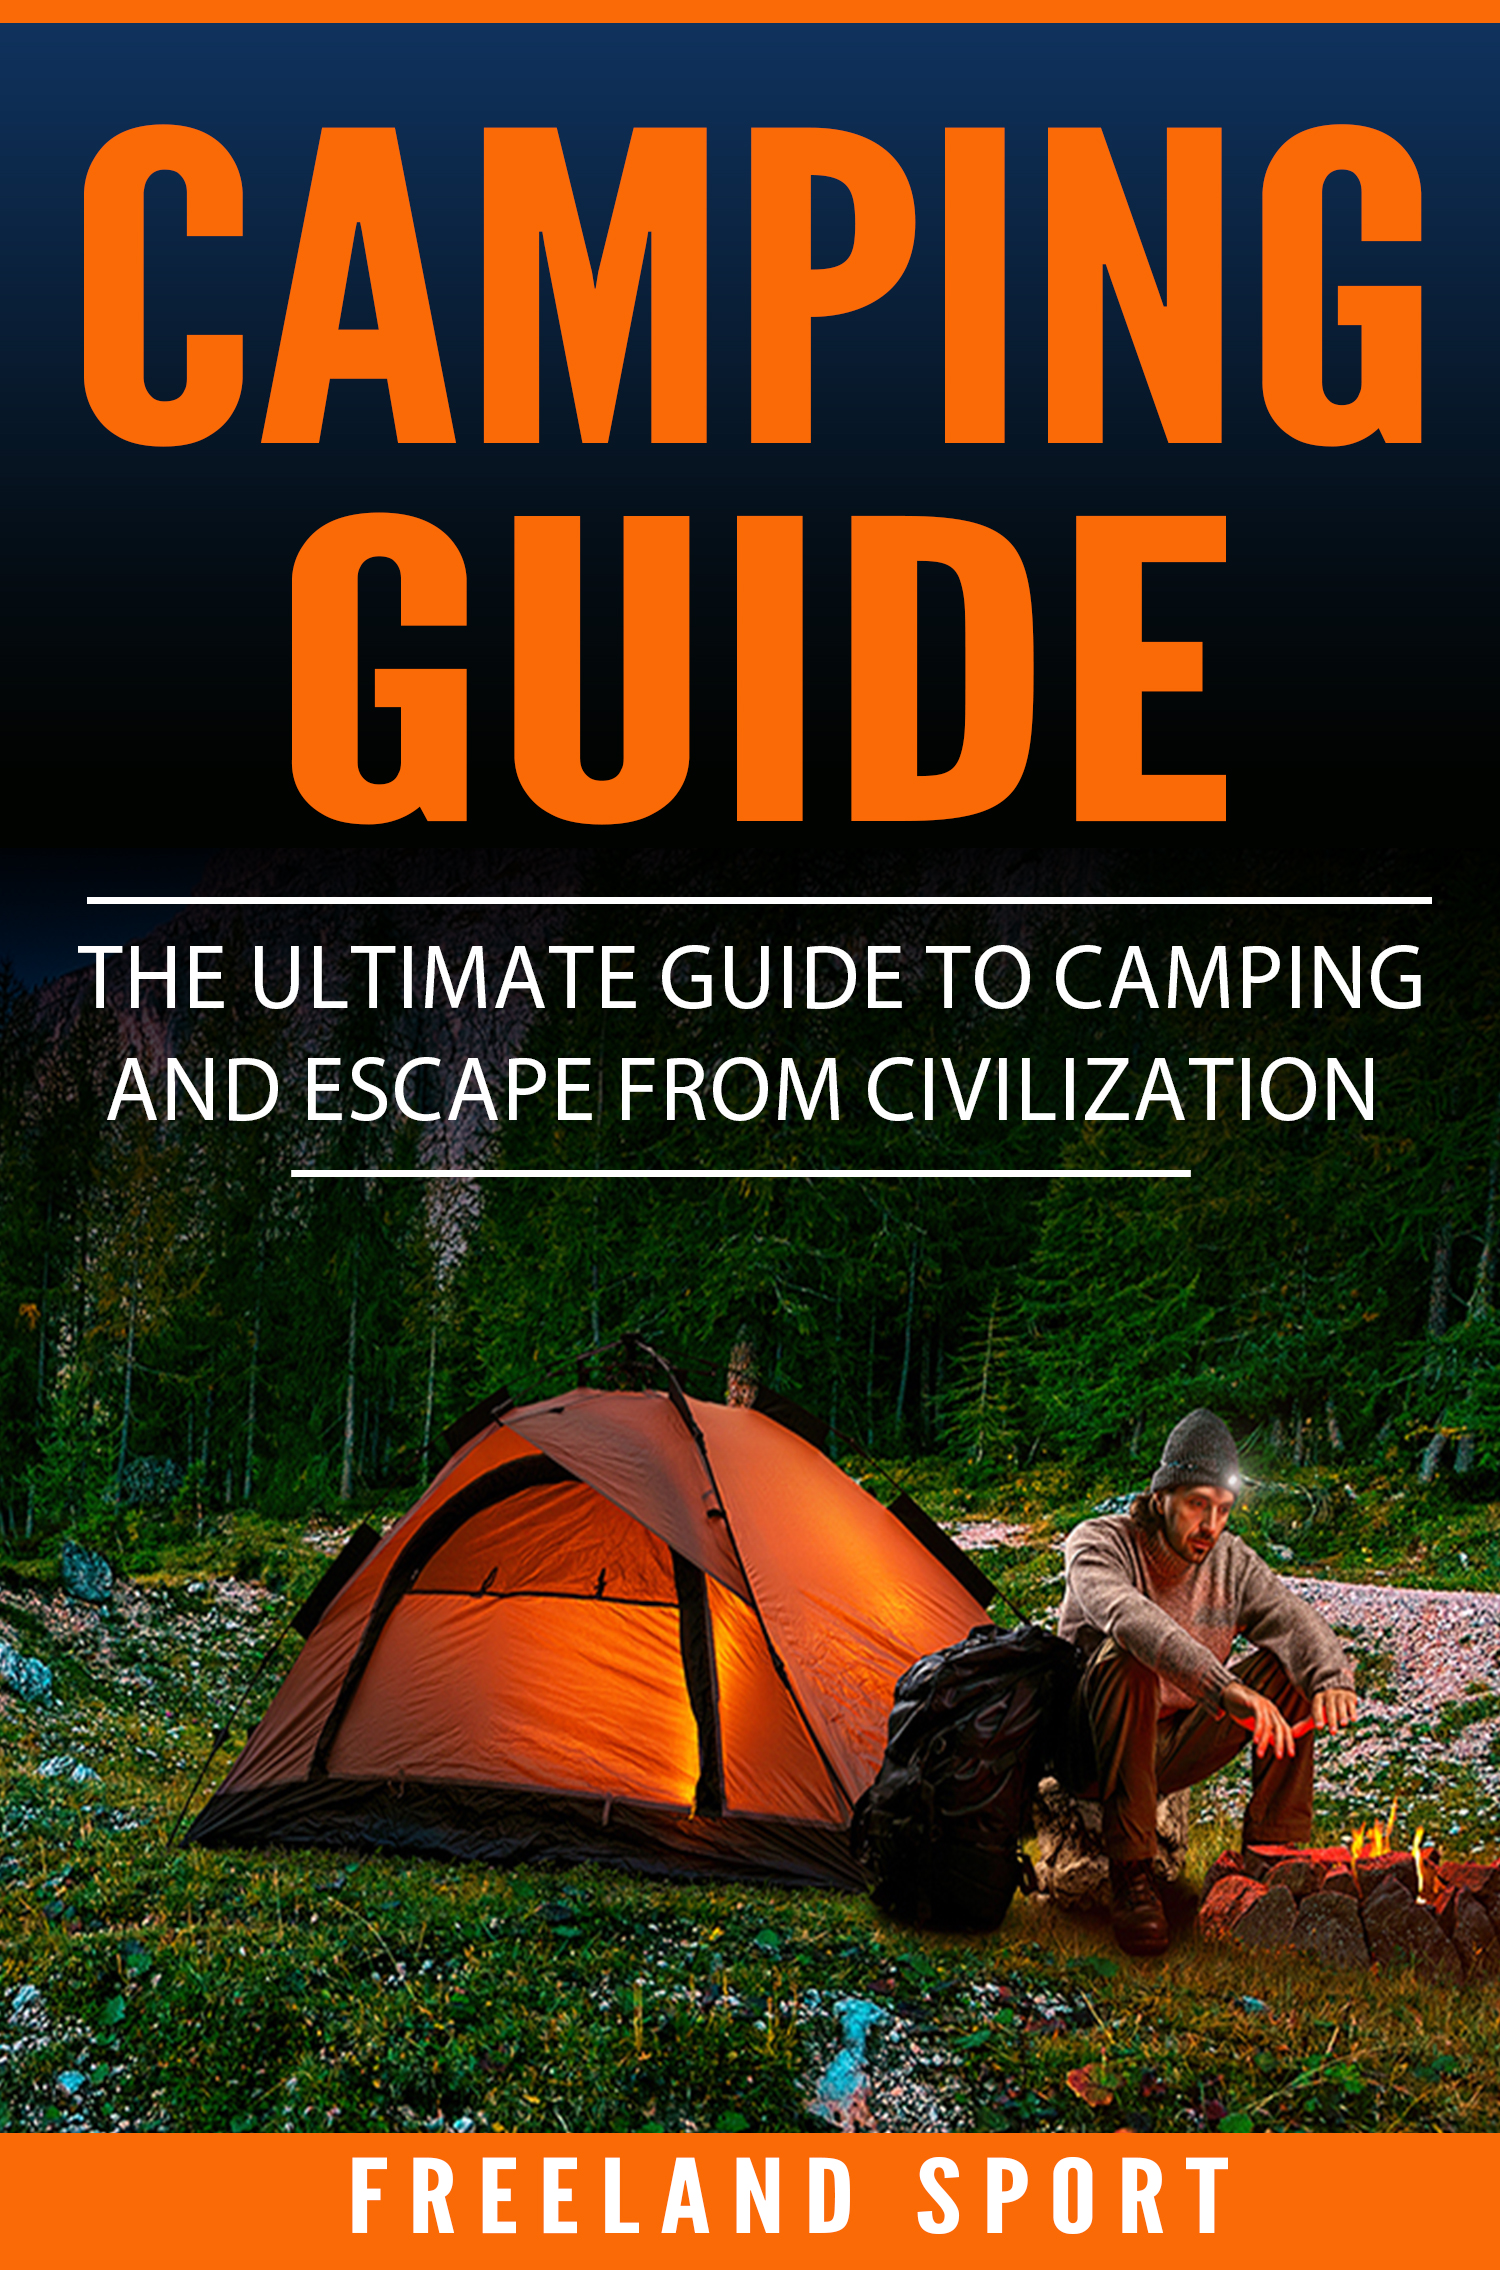 FREE: Camping Guide: The Ultimate Guide to Camping and Escape from Civilization by Freeland Sport